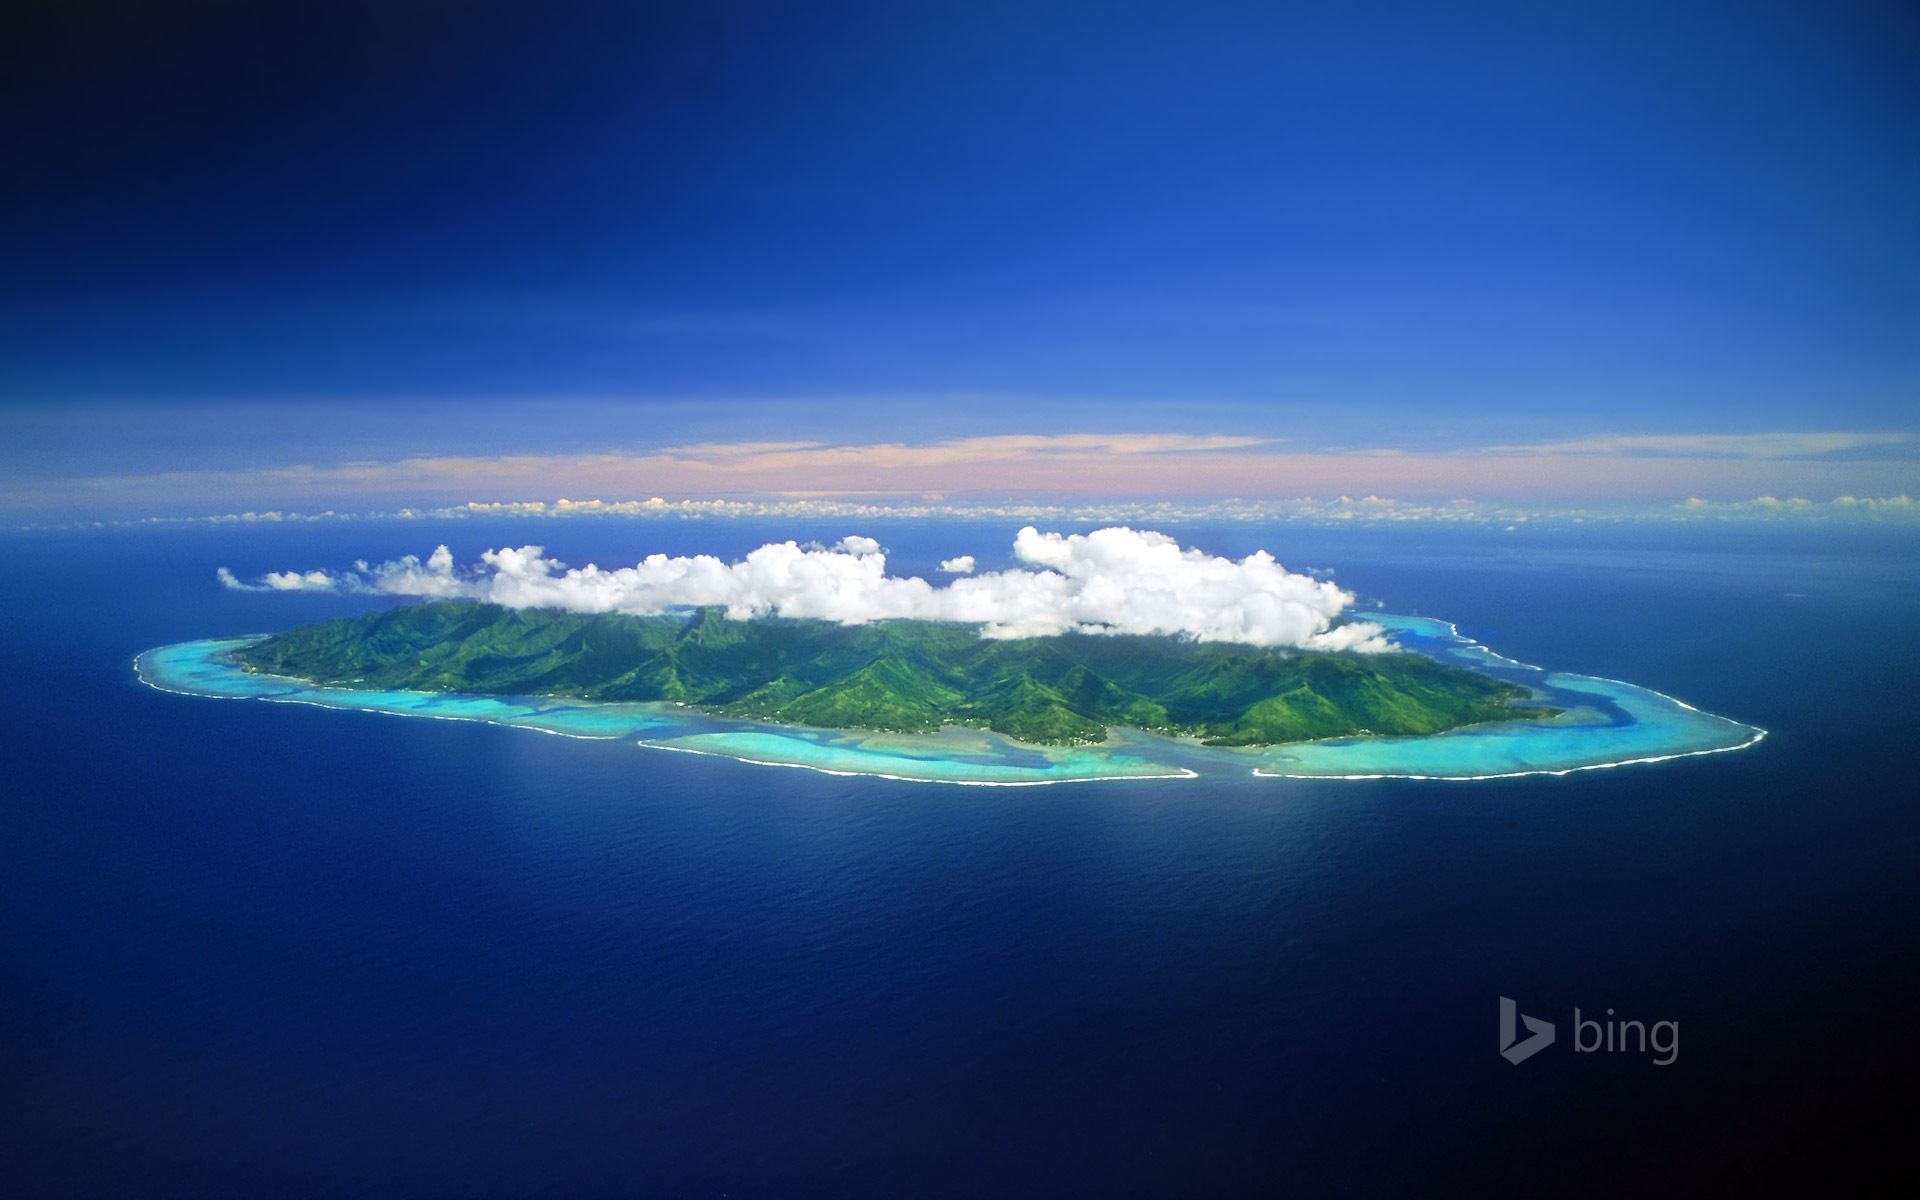 Bing fifth anniversary commemorative edition HD wallpapers #9 - 1920x1200